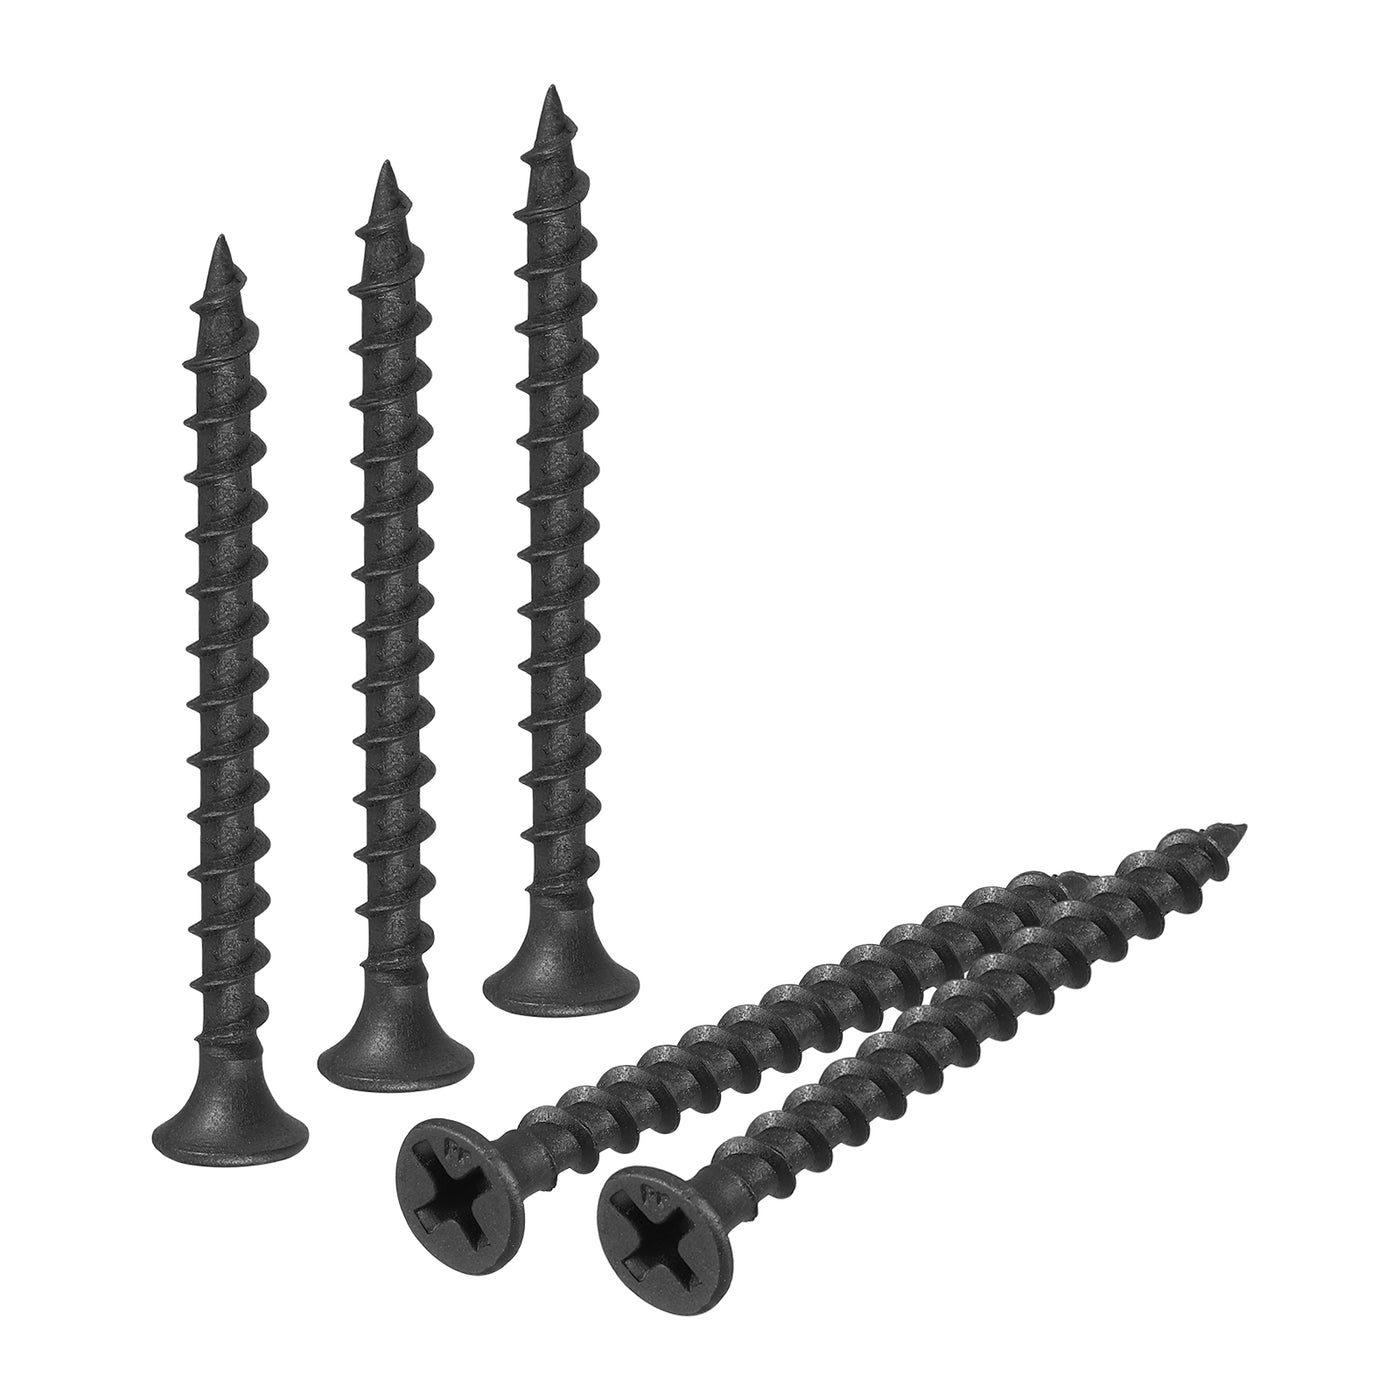 uxcell Uxcell M3.8x45mm 50pcs Phillips Drive Wood Screws, Carbon Steel Self Tapping Screws